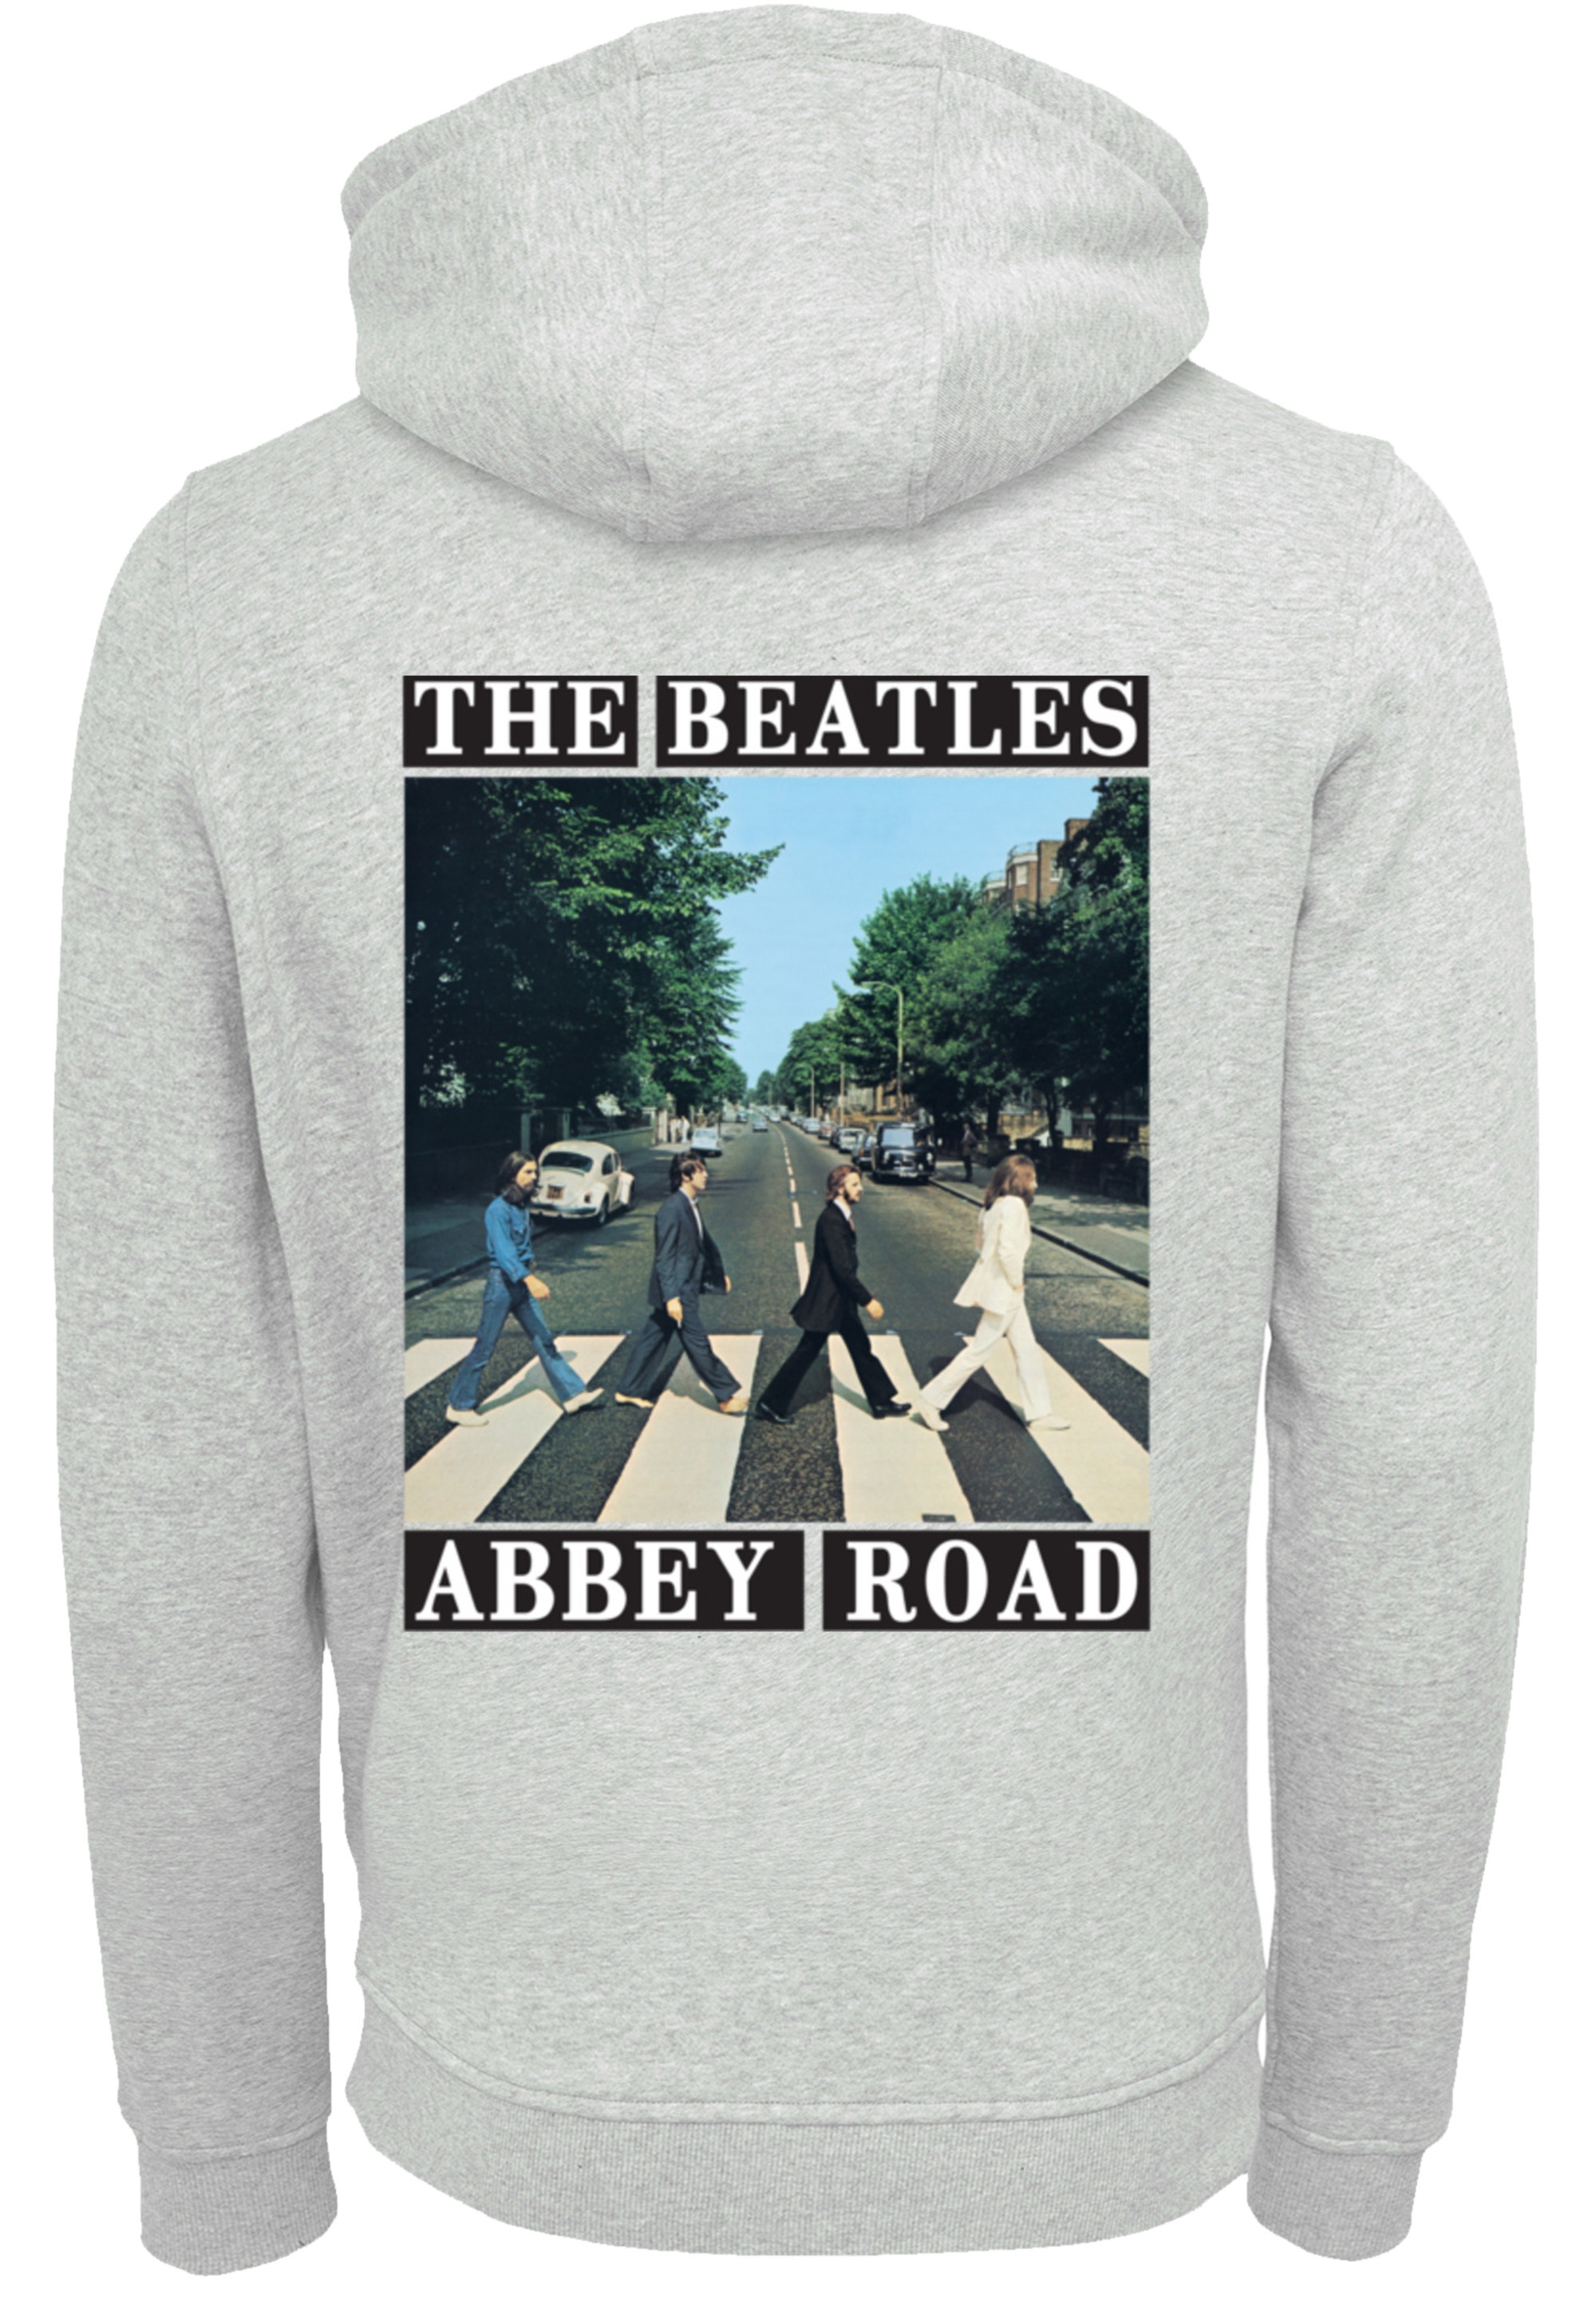 F4NT4STIC Kapuzenpullover »The Beatles Abbey Road Rock Musik Band«, Hoodie,  Warm, Bequem online kaufen | I\'m walking